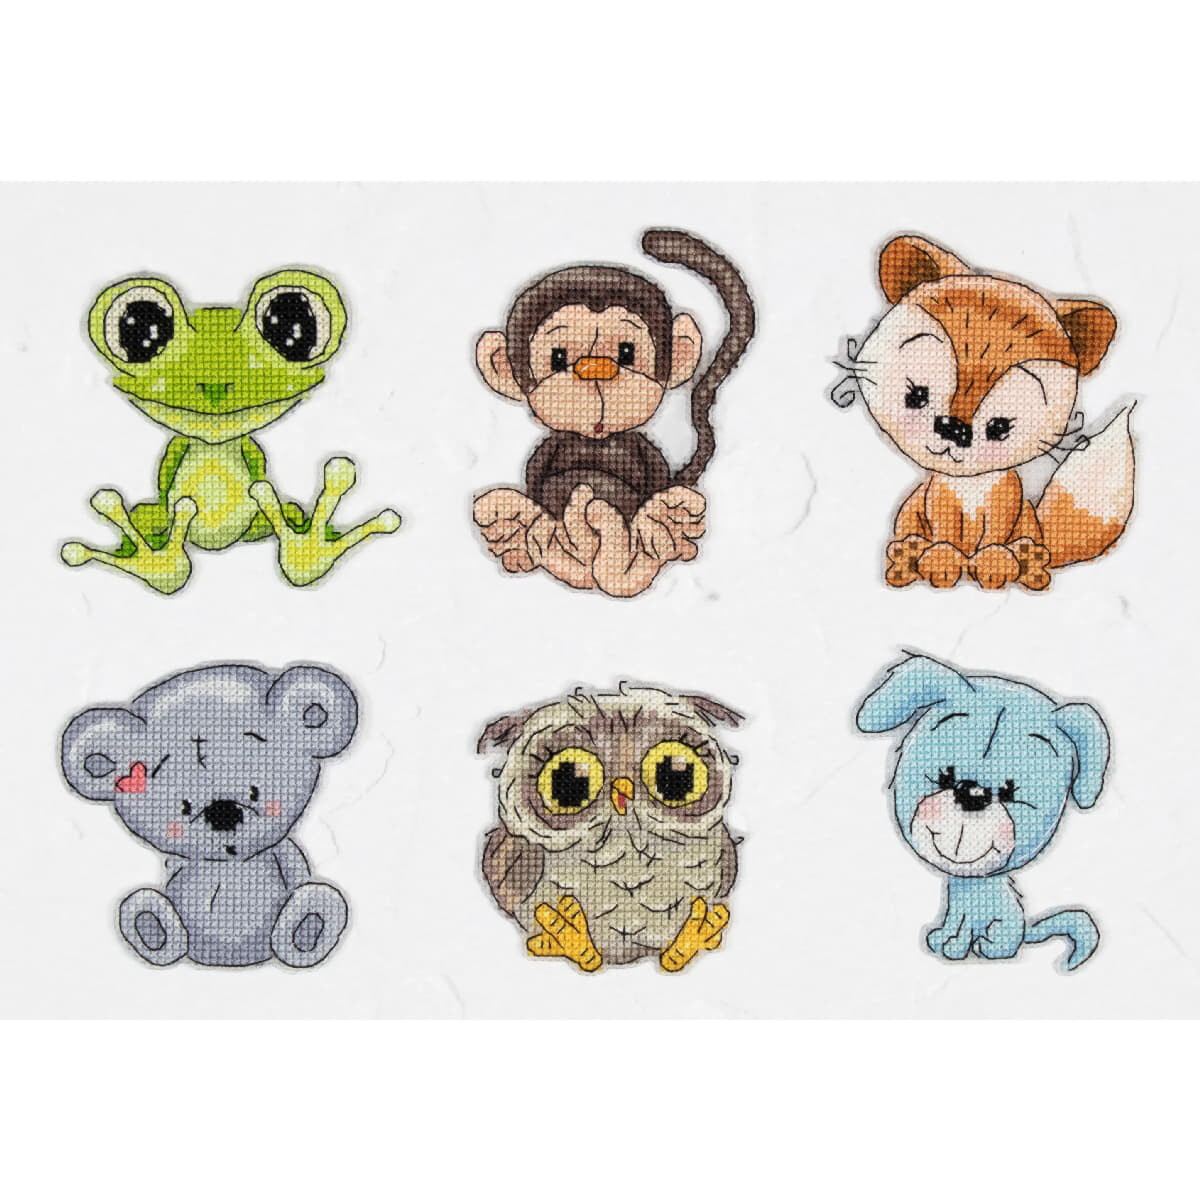 Luca-S counted cross stitch kit "Ornaments Friends I...